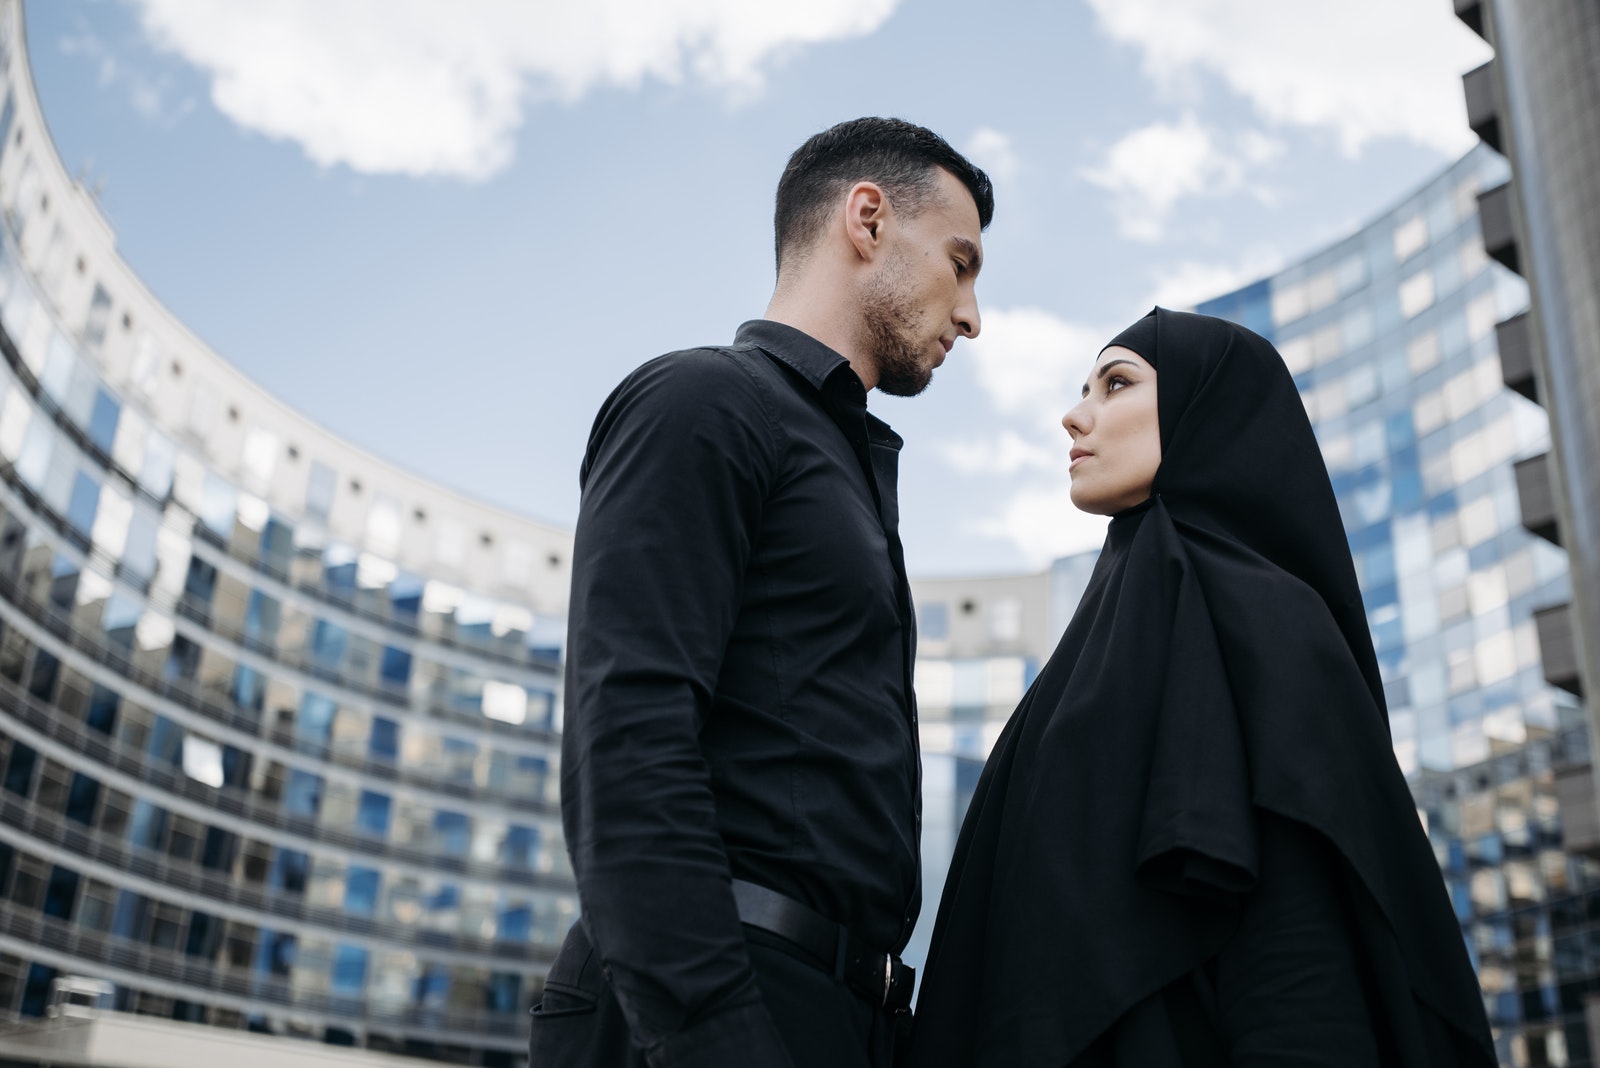 A Man and Woman in Black Clothes Looking at Each Other